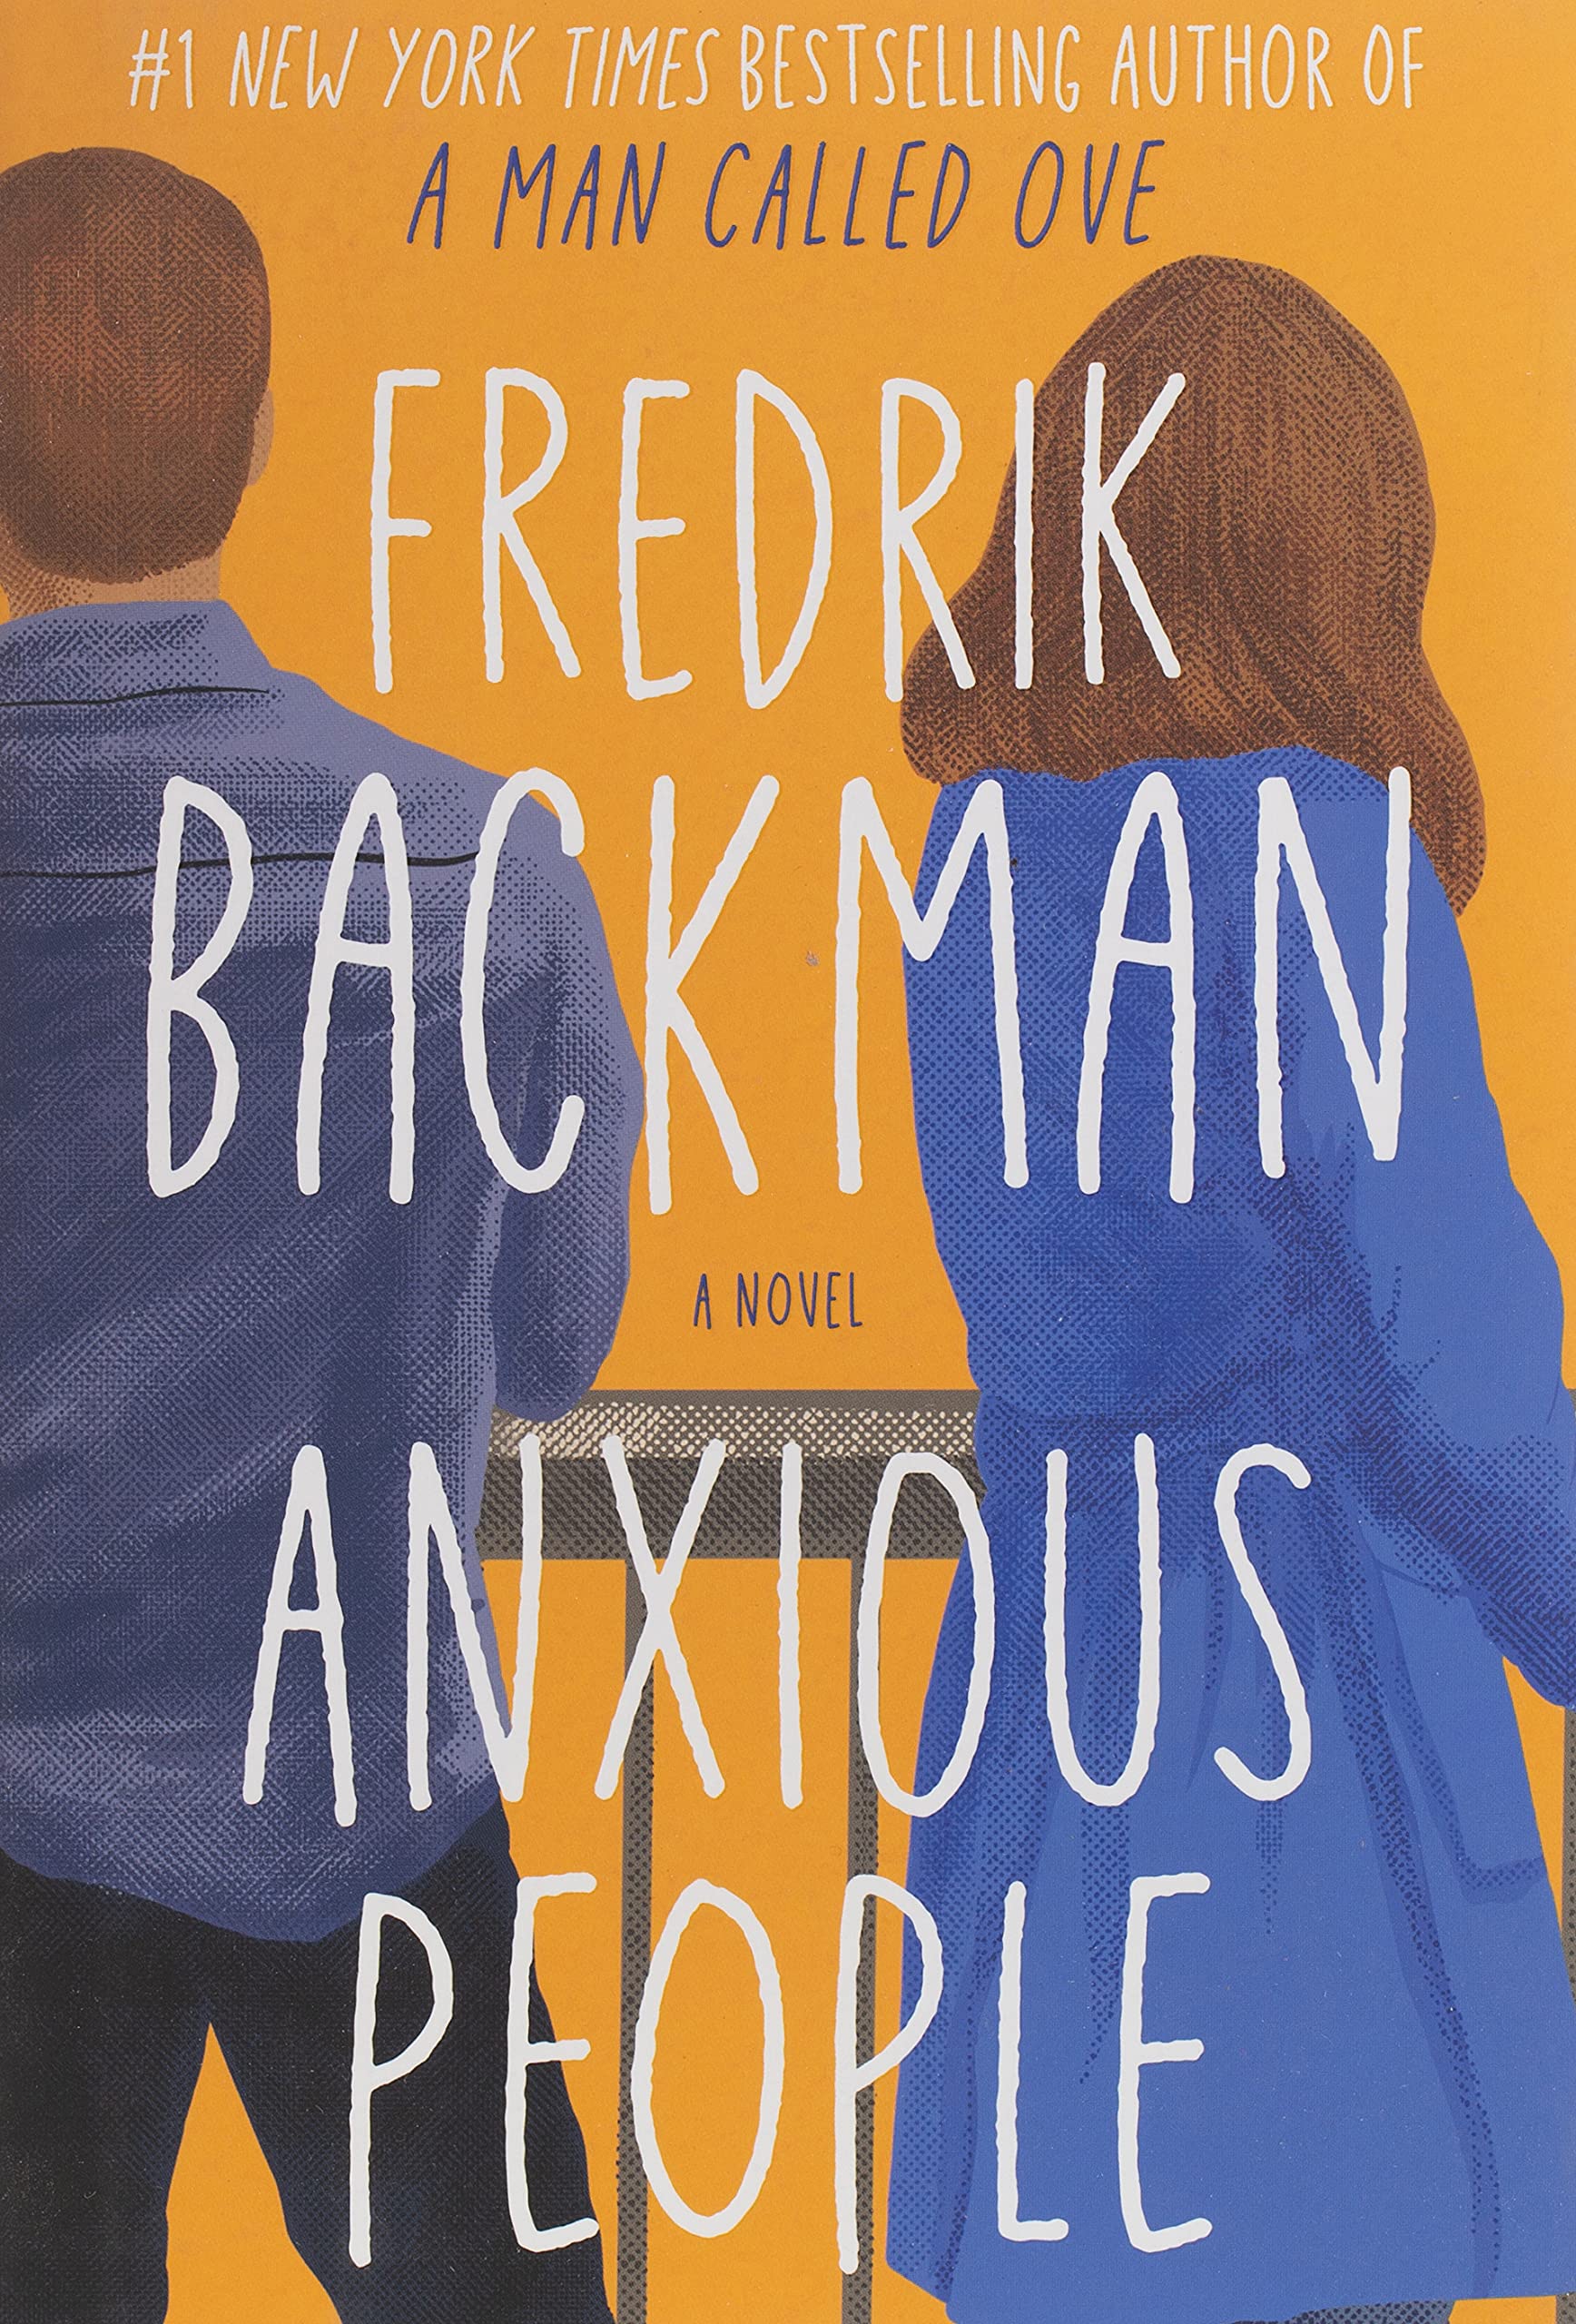 The cover of Anxious People by Fredrik Backman. It shows the backs of two people both with brown hair and wearing blue. They are facing slightly away from each other and overlooking a ledge. The background of the book is orange.